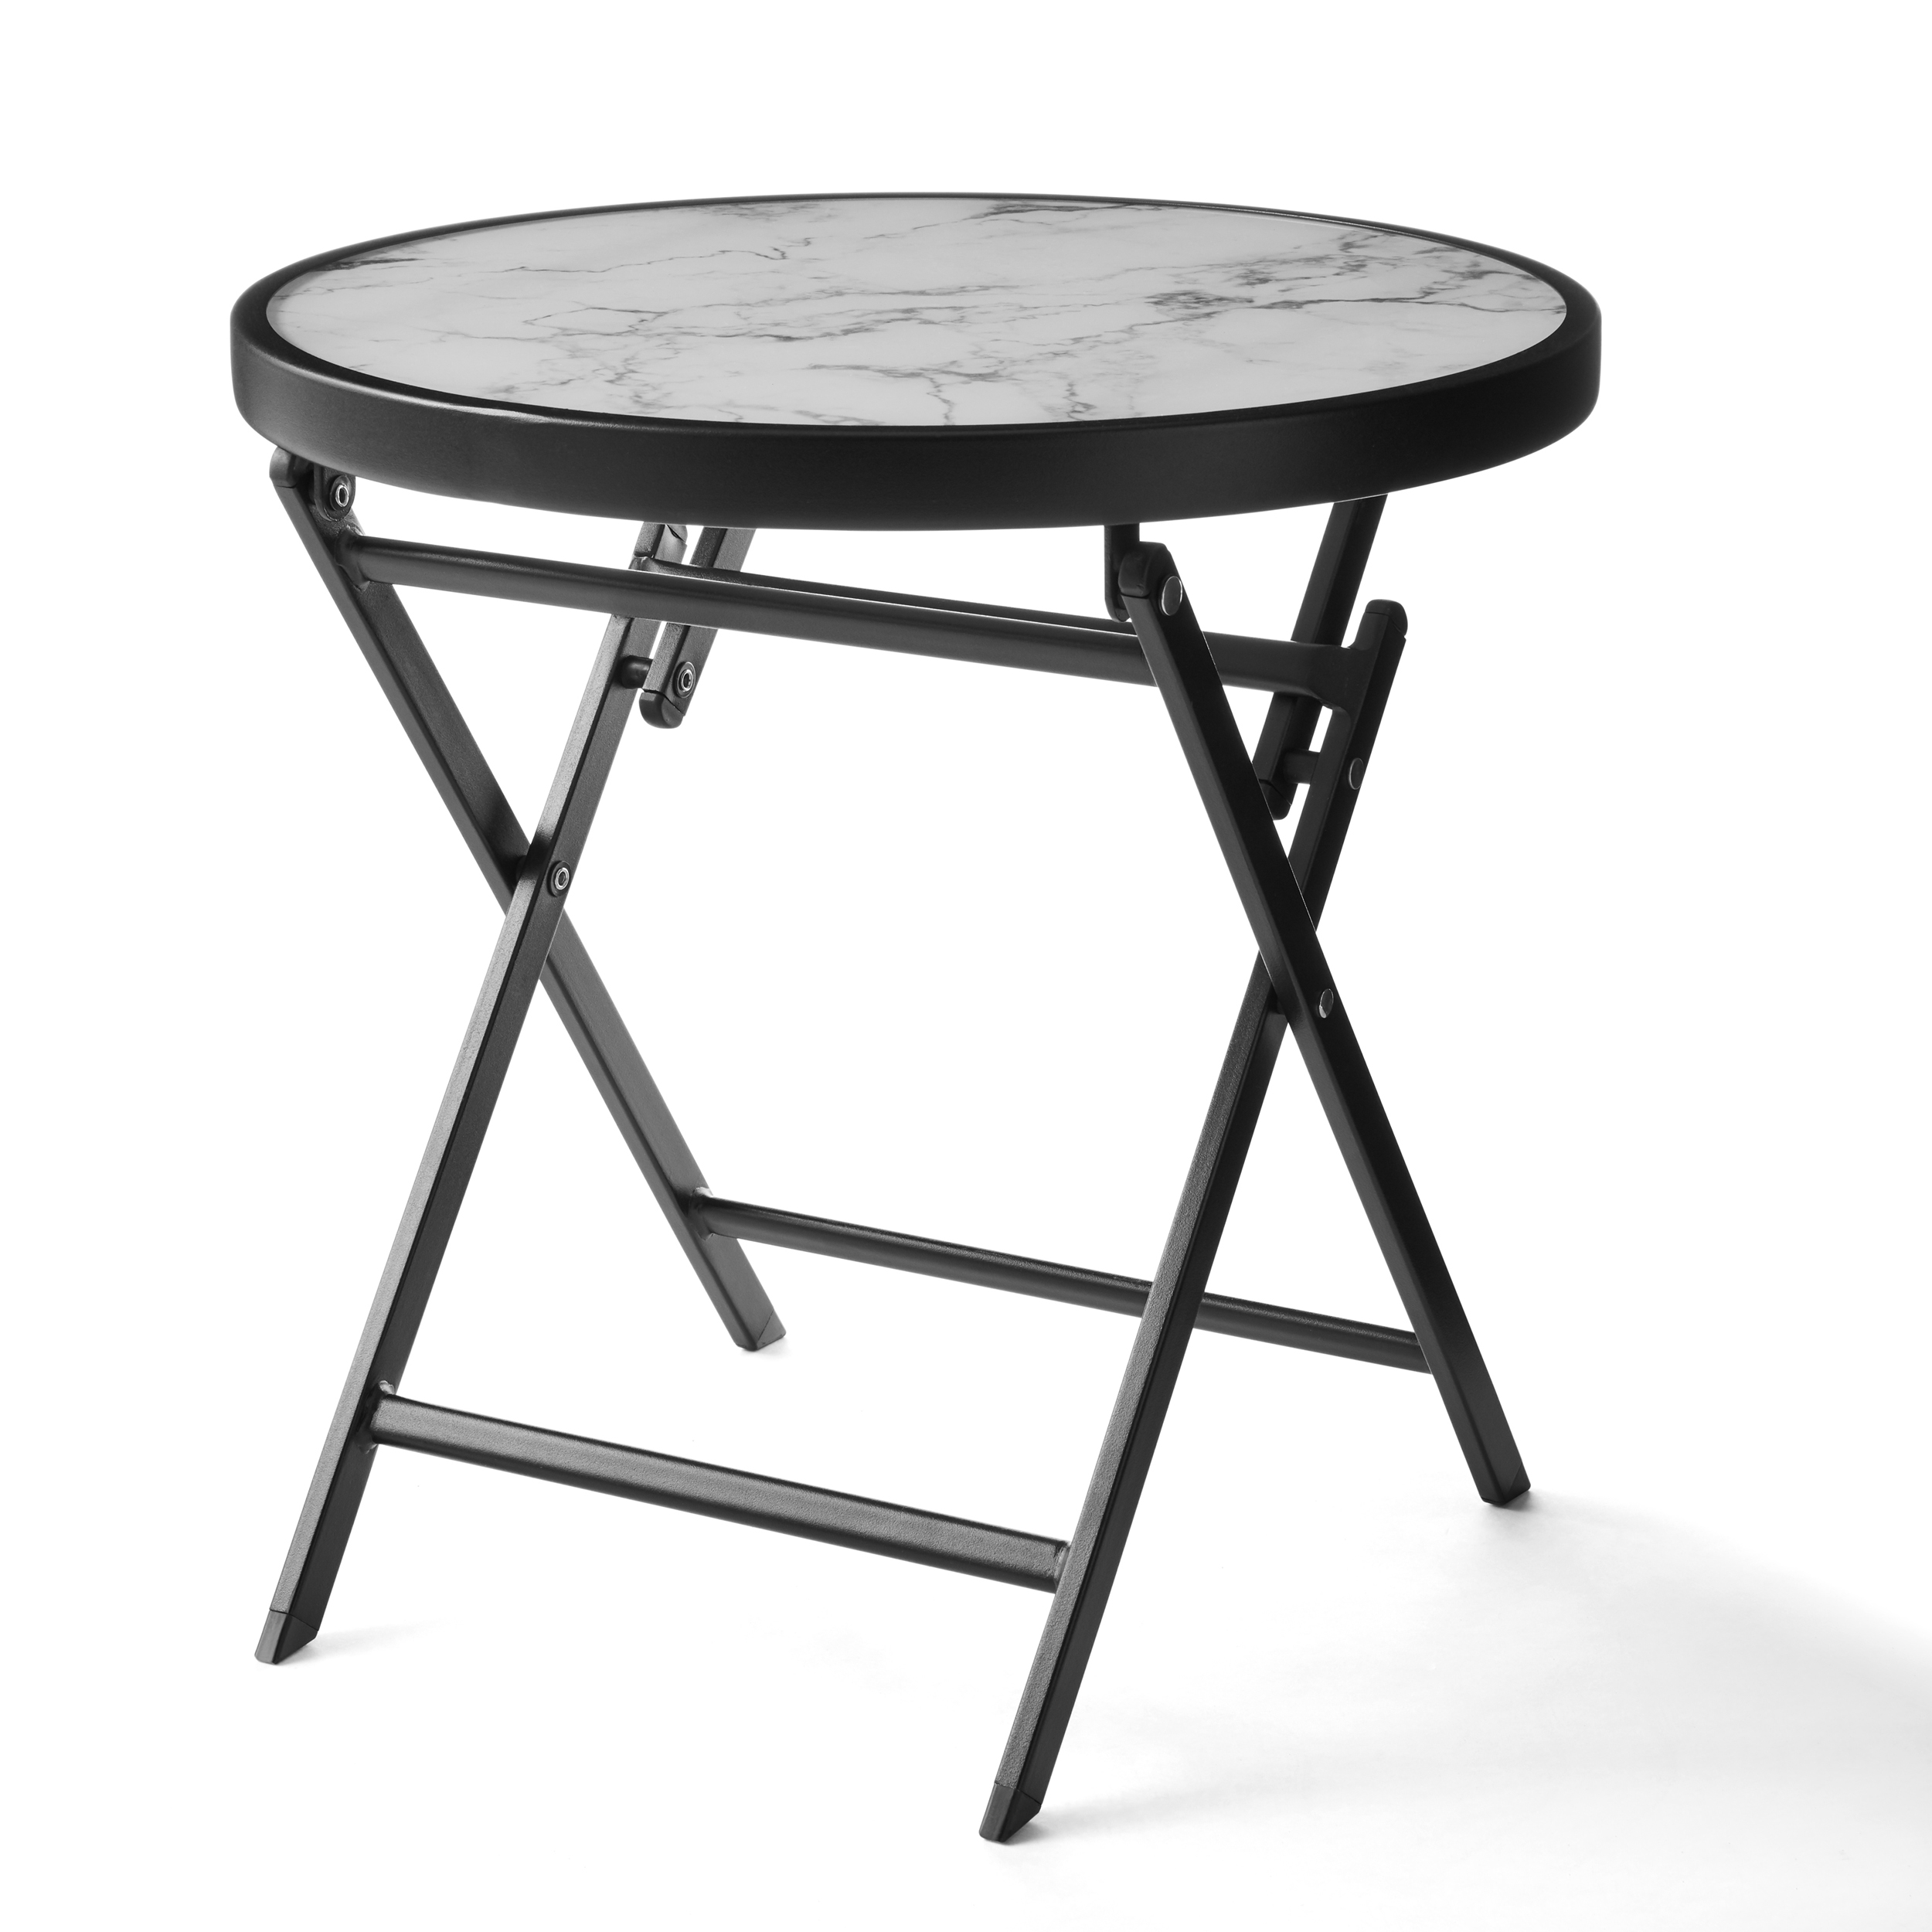 Mainstays 18" Greyson Square White Marble Steel Round Folding Table - image 2 of 7